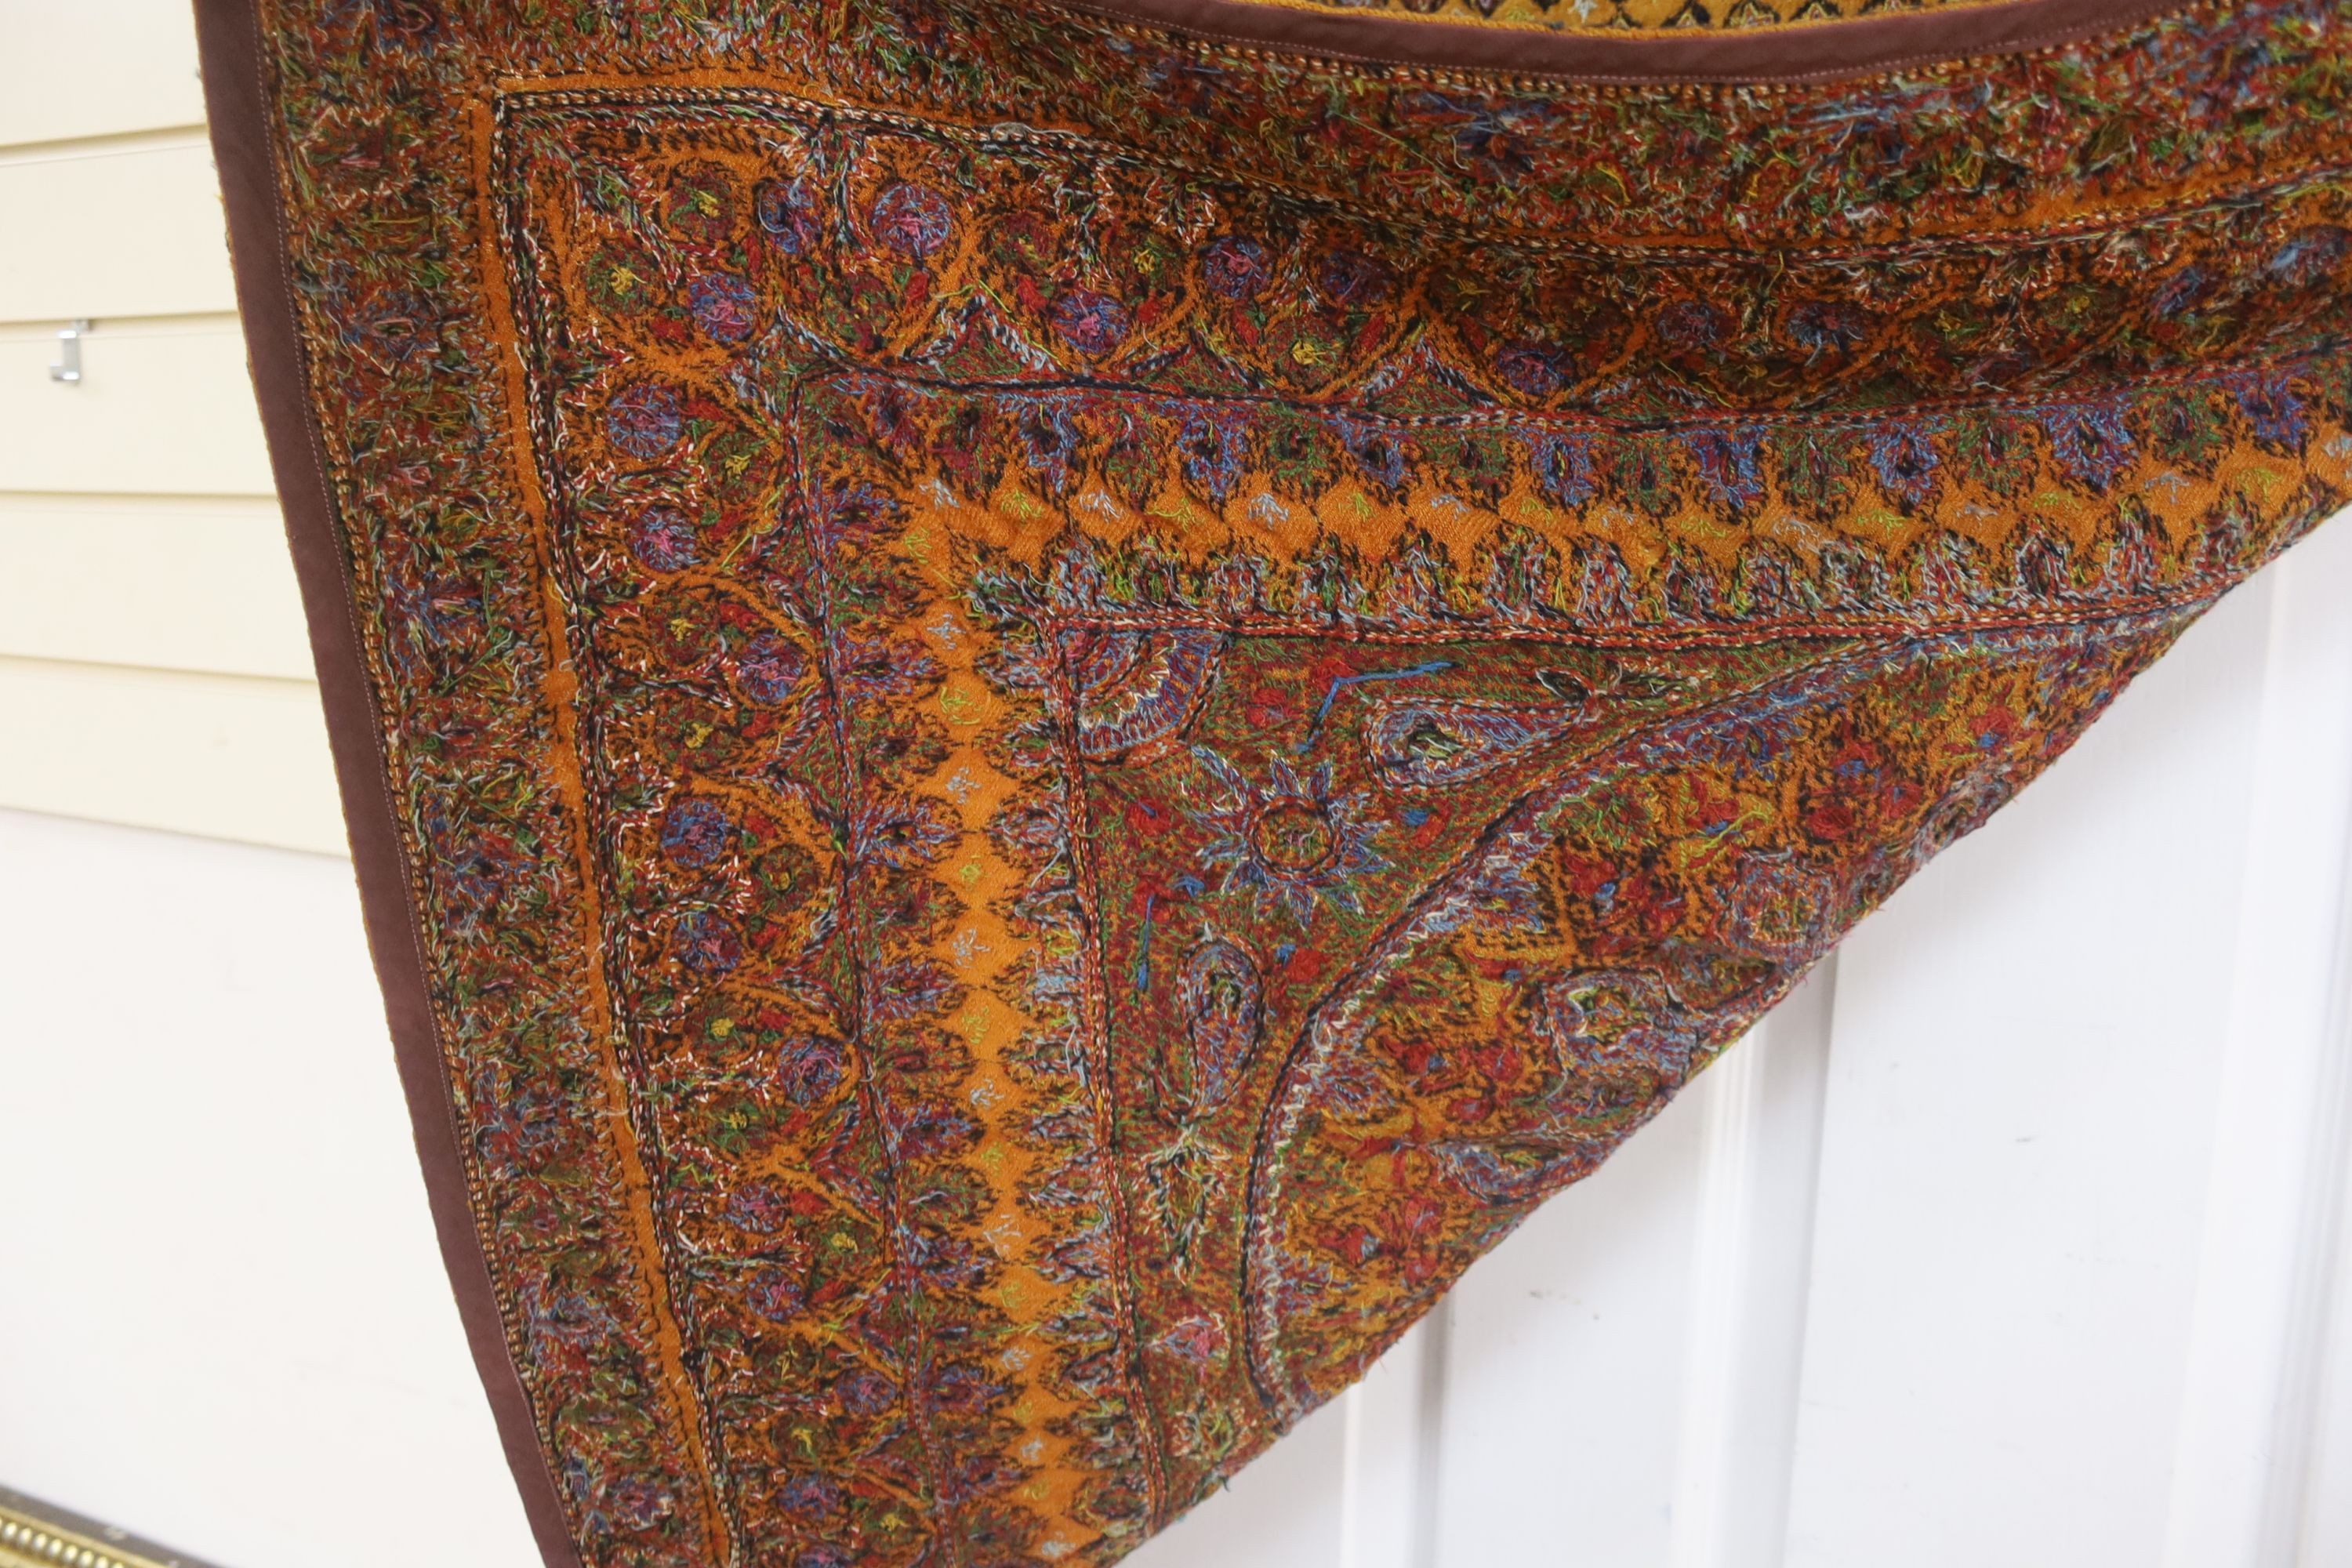 A Kashmiri wool embroidered hanging, with central cartouche, 97 cms wide x 99 cms high.